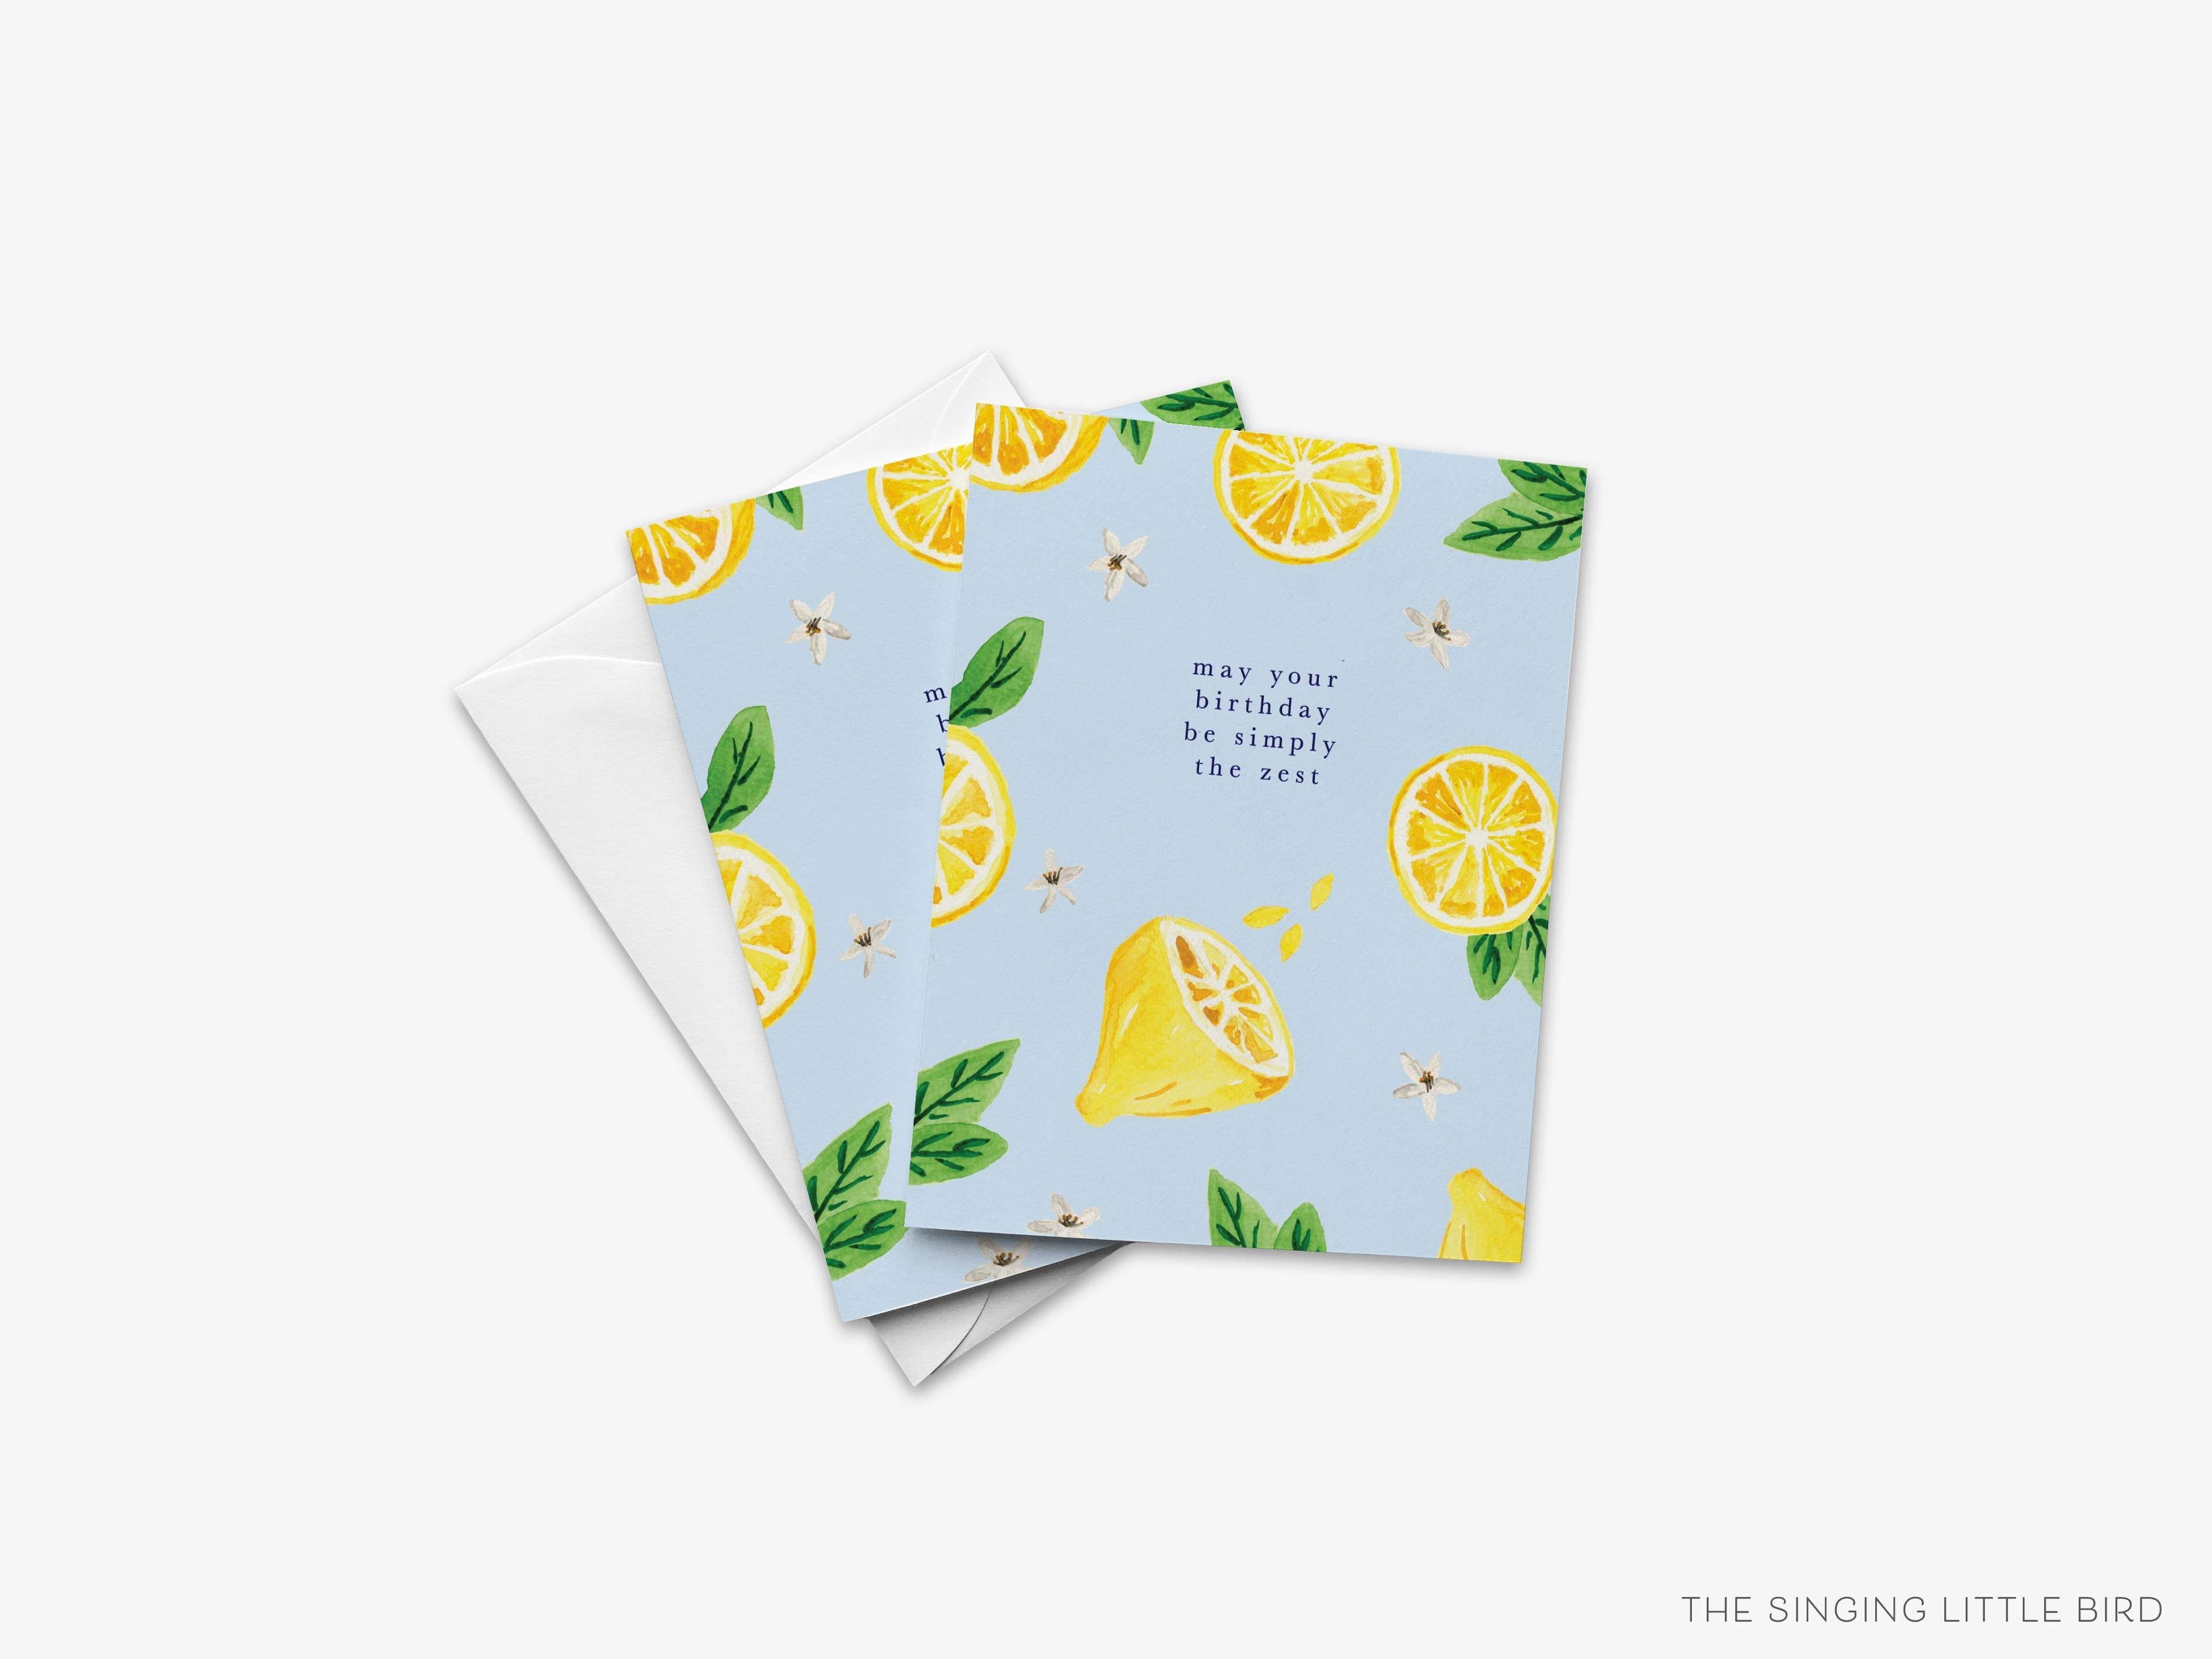 May Your Birthday Be Simply The Zest Lemon Pun Birthday Card-These folded birthday cards are 4.25x5.5 and feature our hand-painted watercolor lemon, printed in the USA on 100lb textured stock. They come with a White envelope and make a great birthday card for a summer birthday.-The Singing Little Bird